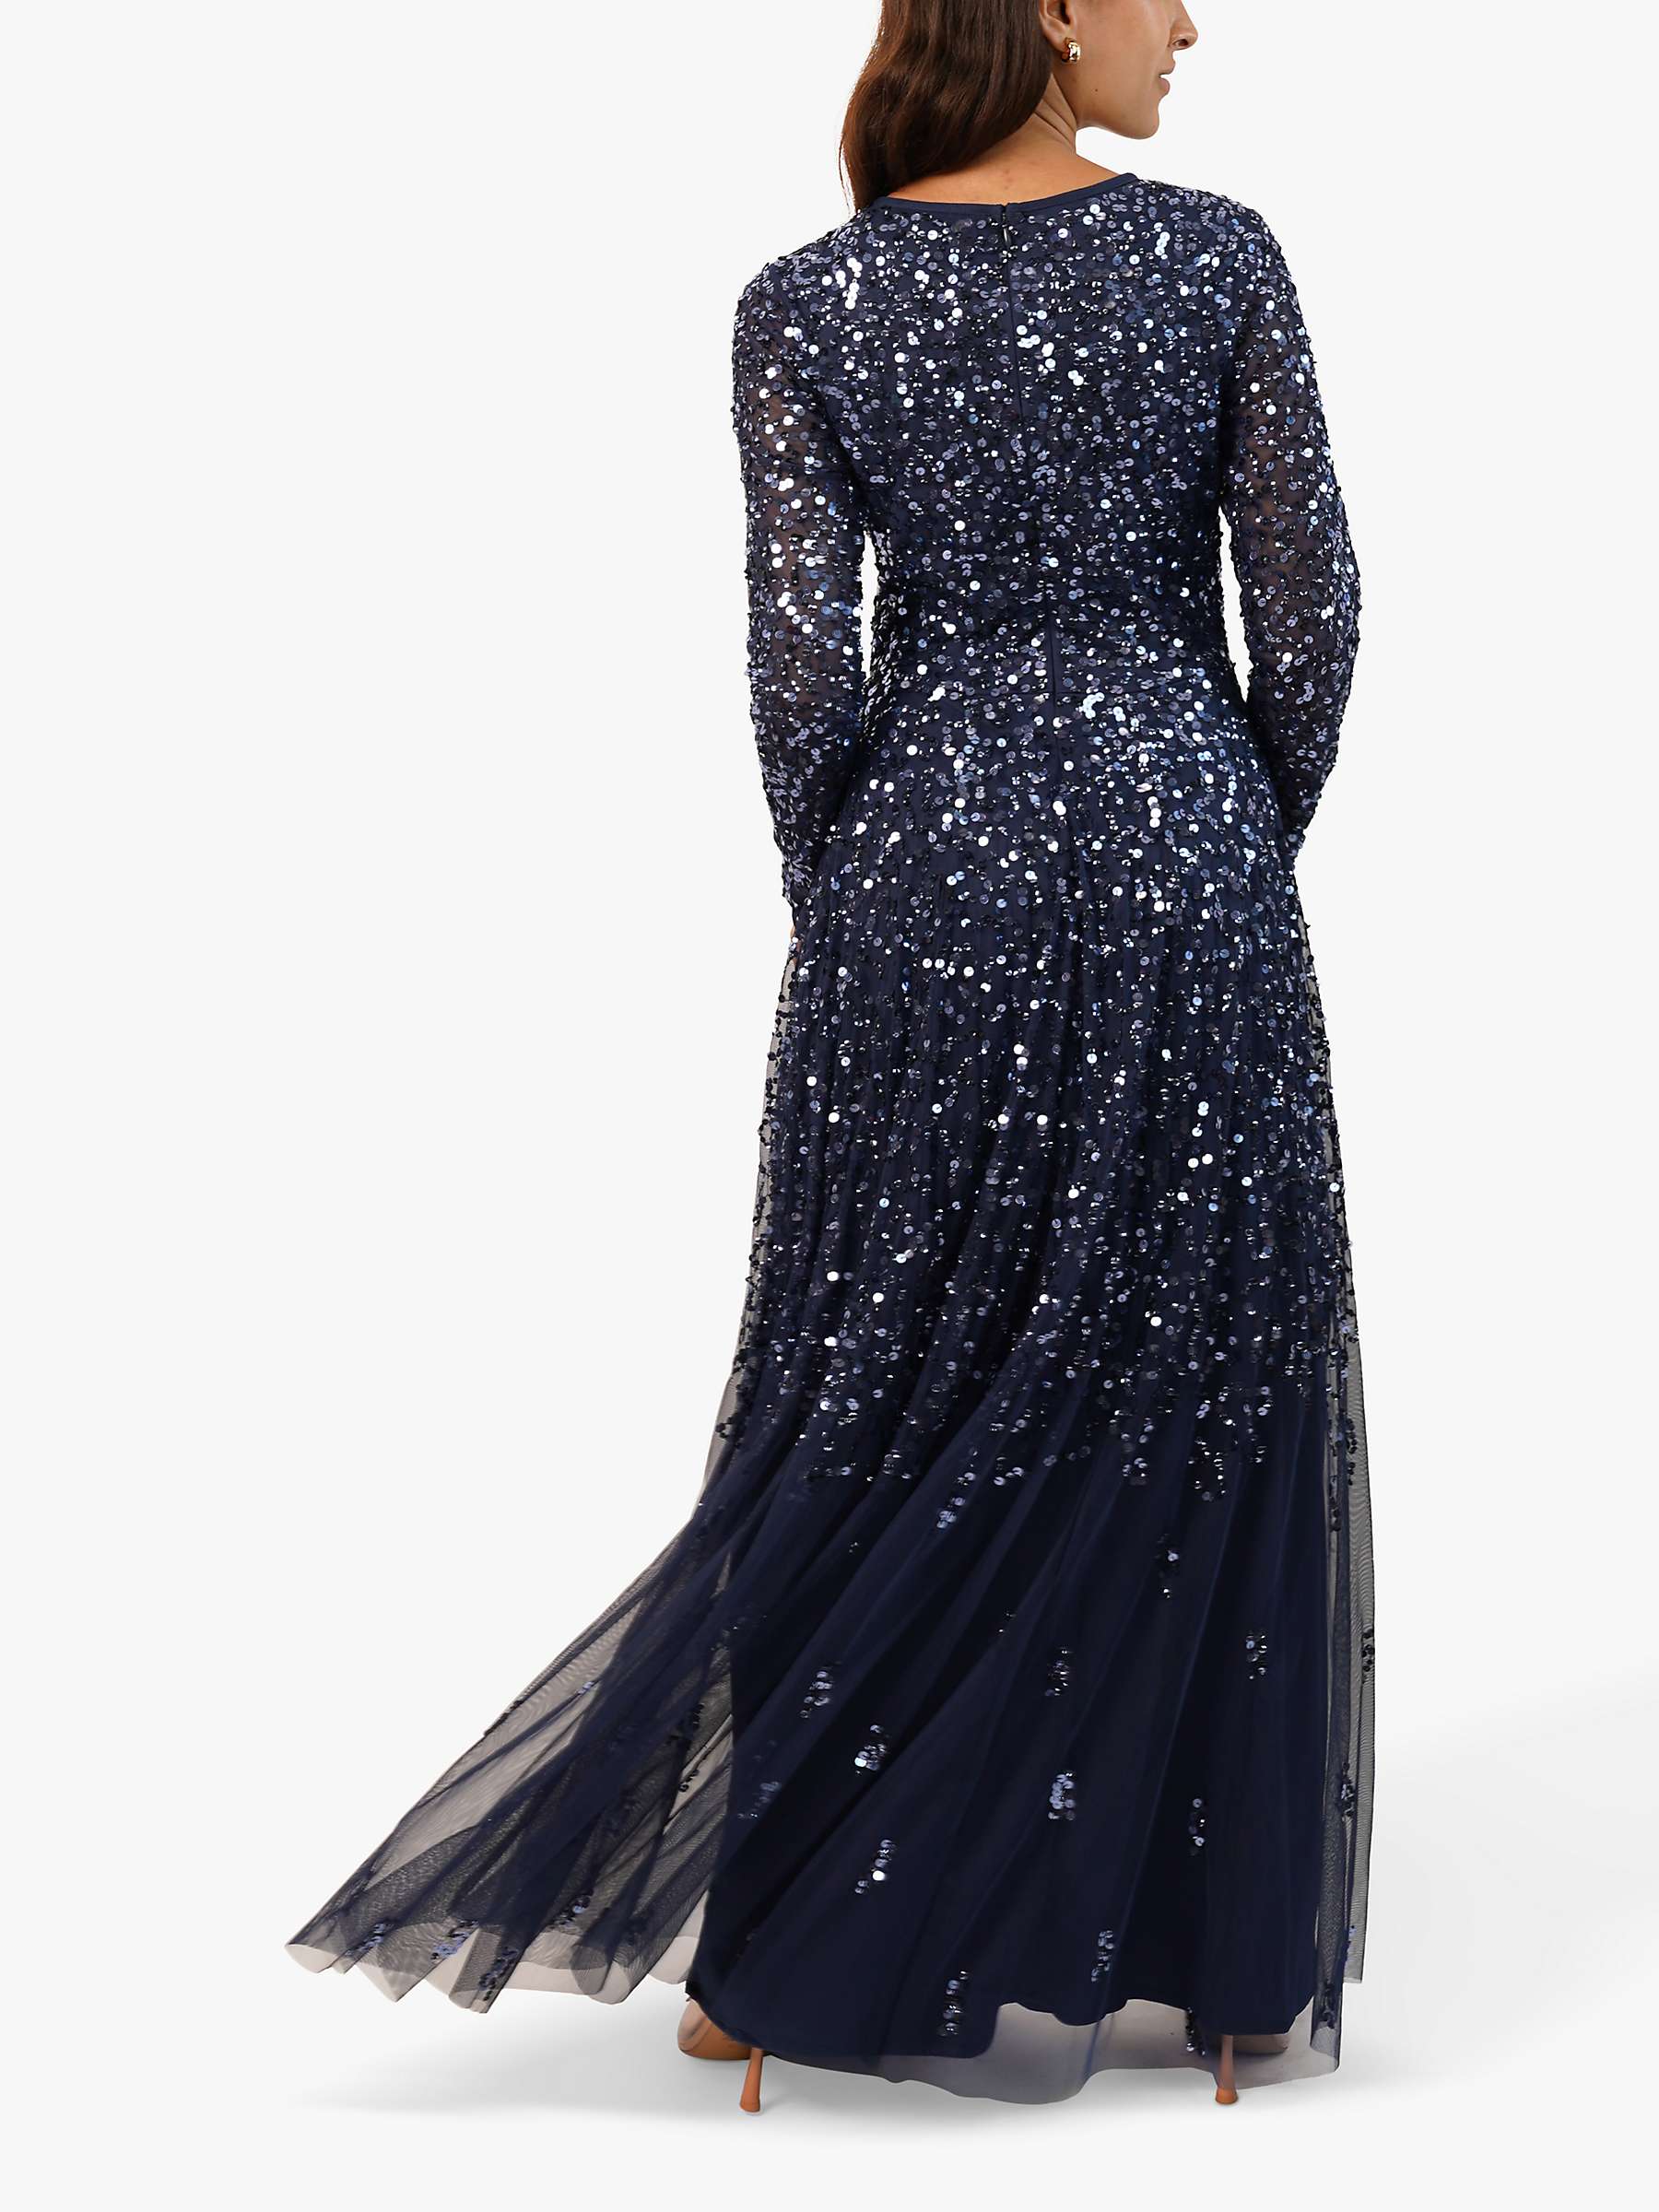 Buy Lace & Beads Sila Embellished Maxi Dress, Navy Online at johnlewis.com